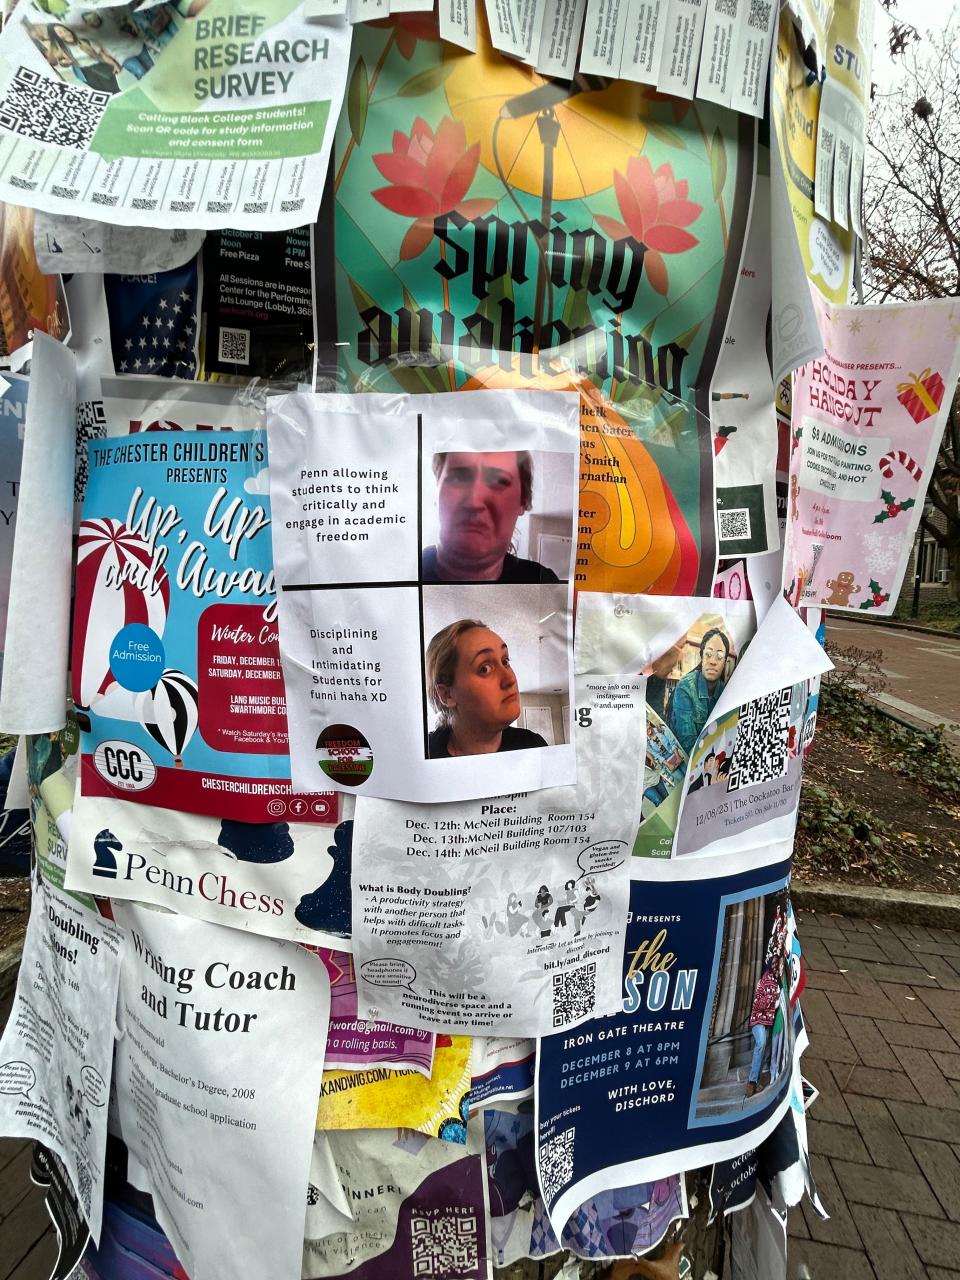 A flier at the University of Pennsylvania with a sticker reading "Freedom School for Palestine" takes the school to task for its stance on free speech and academic freedom. Two of its leaders resigned Saturday amid turmoil their response to over antisemitism on campus.